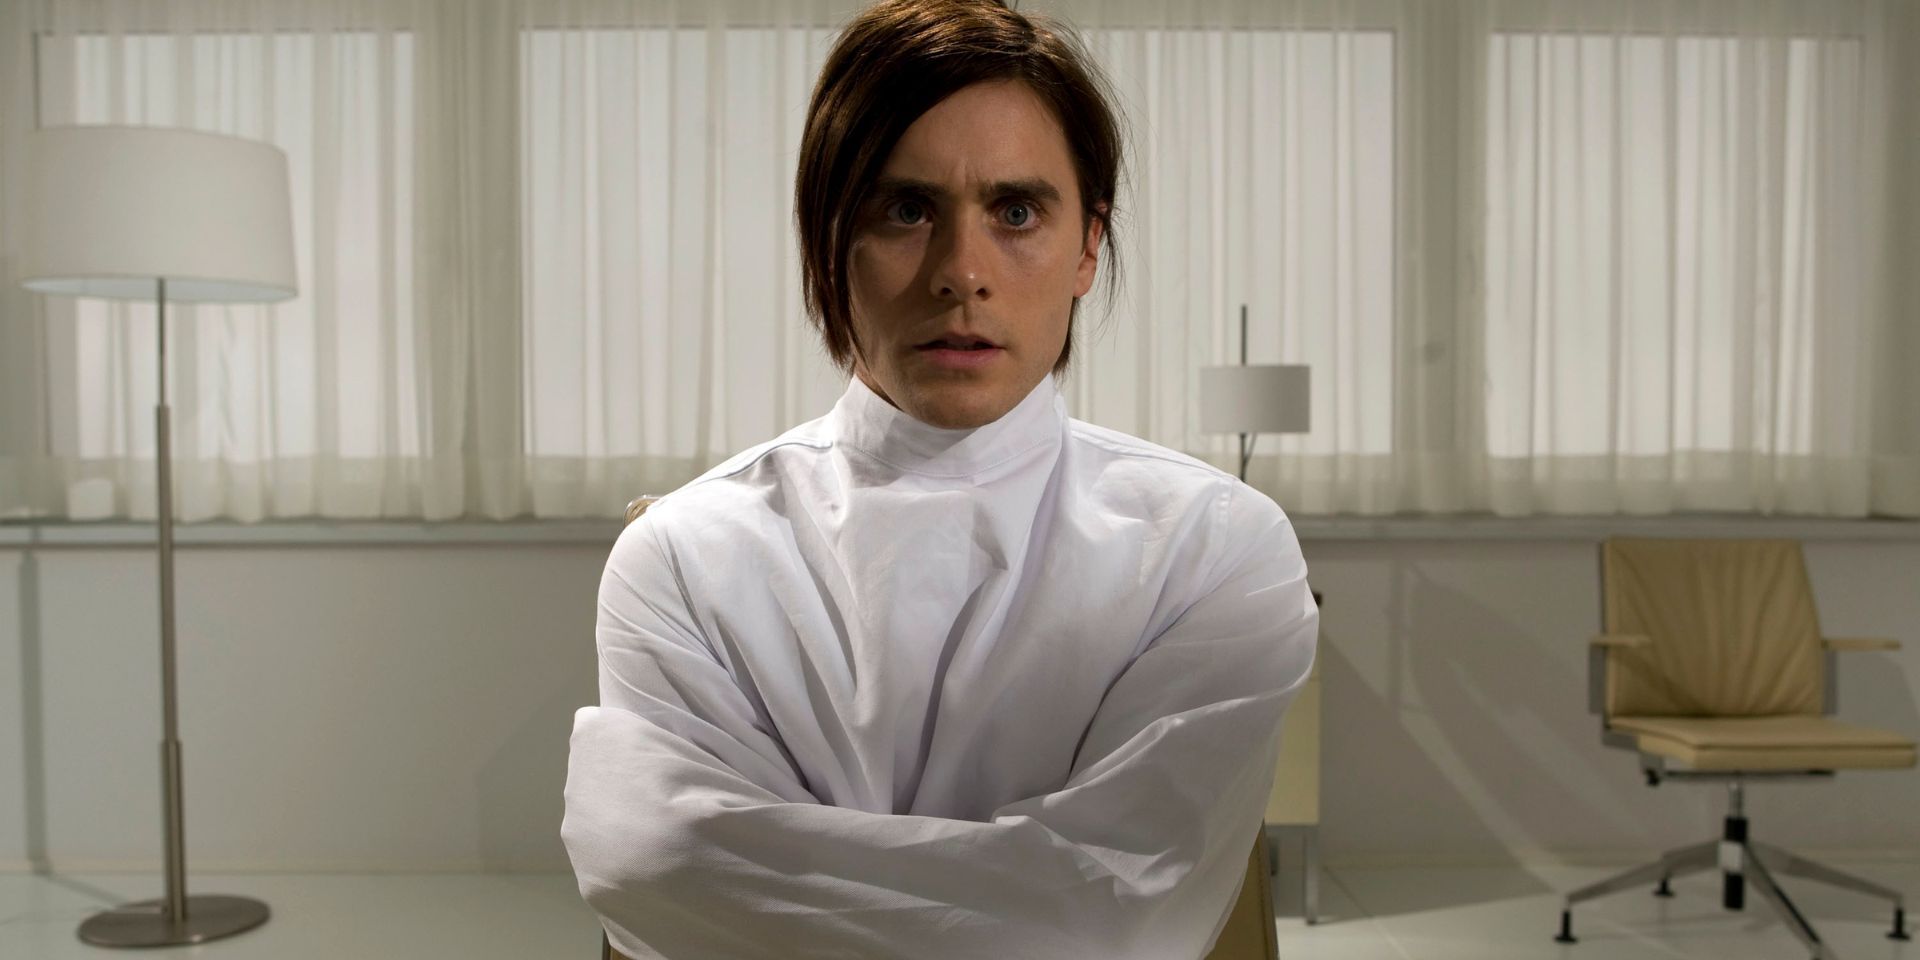 Jared Leto in a straitjacket in the Butterfly Effect-style Mr. Nobody